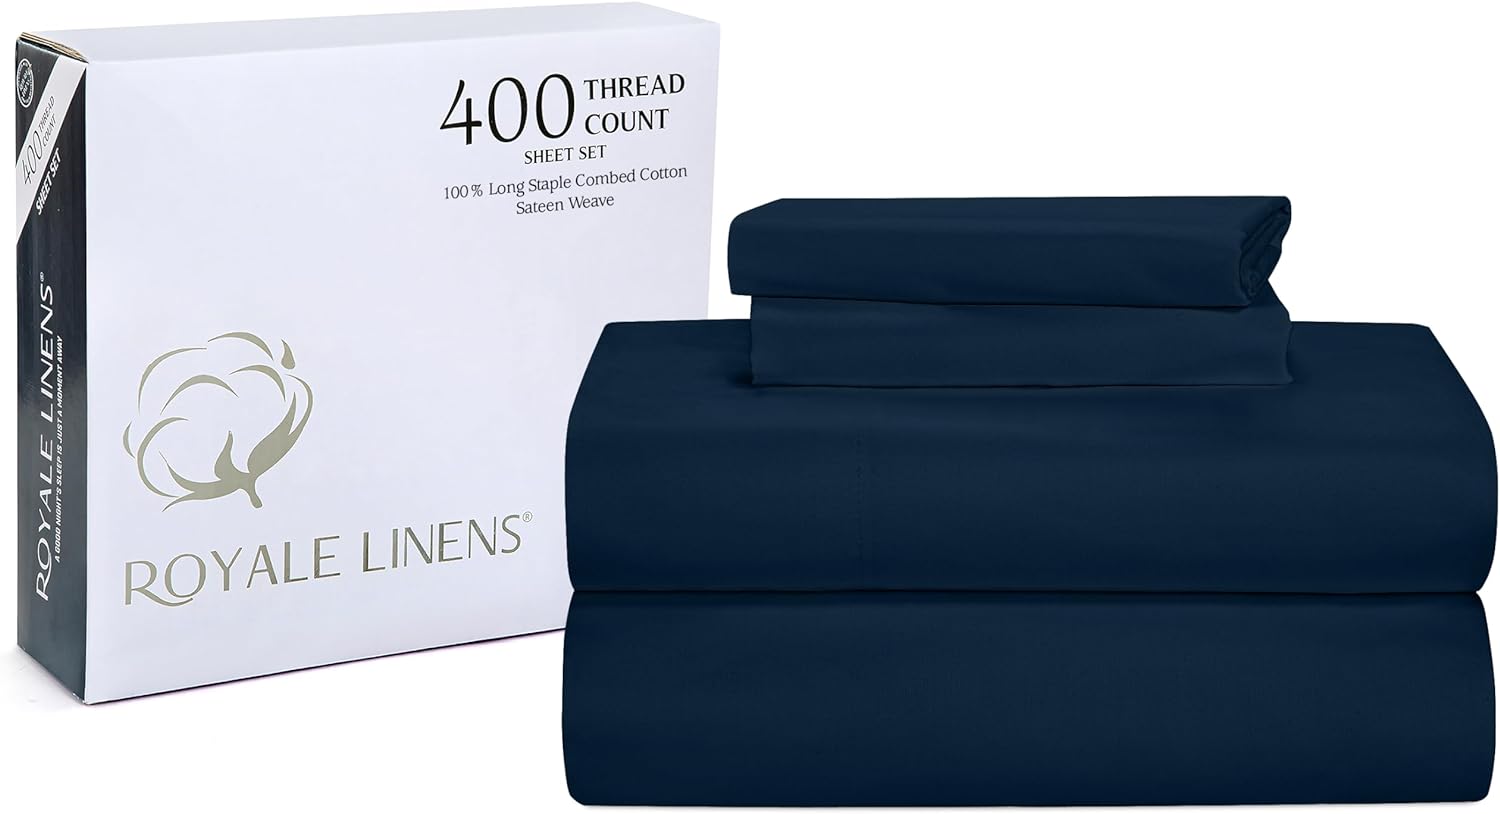 ROYALE LINENS 400 Thread Count 100% Cotton Sateen Sheet Set, Bed Sheet Set, Wrinkle & Fade Resistant Luxury Sheet Set (Navy, Queen)